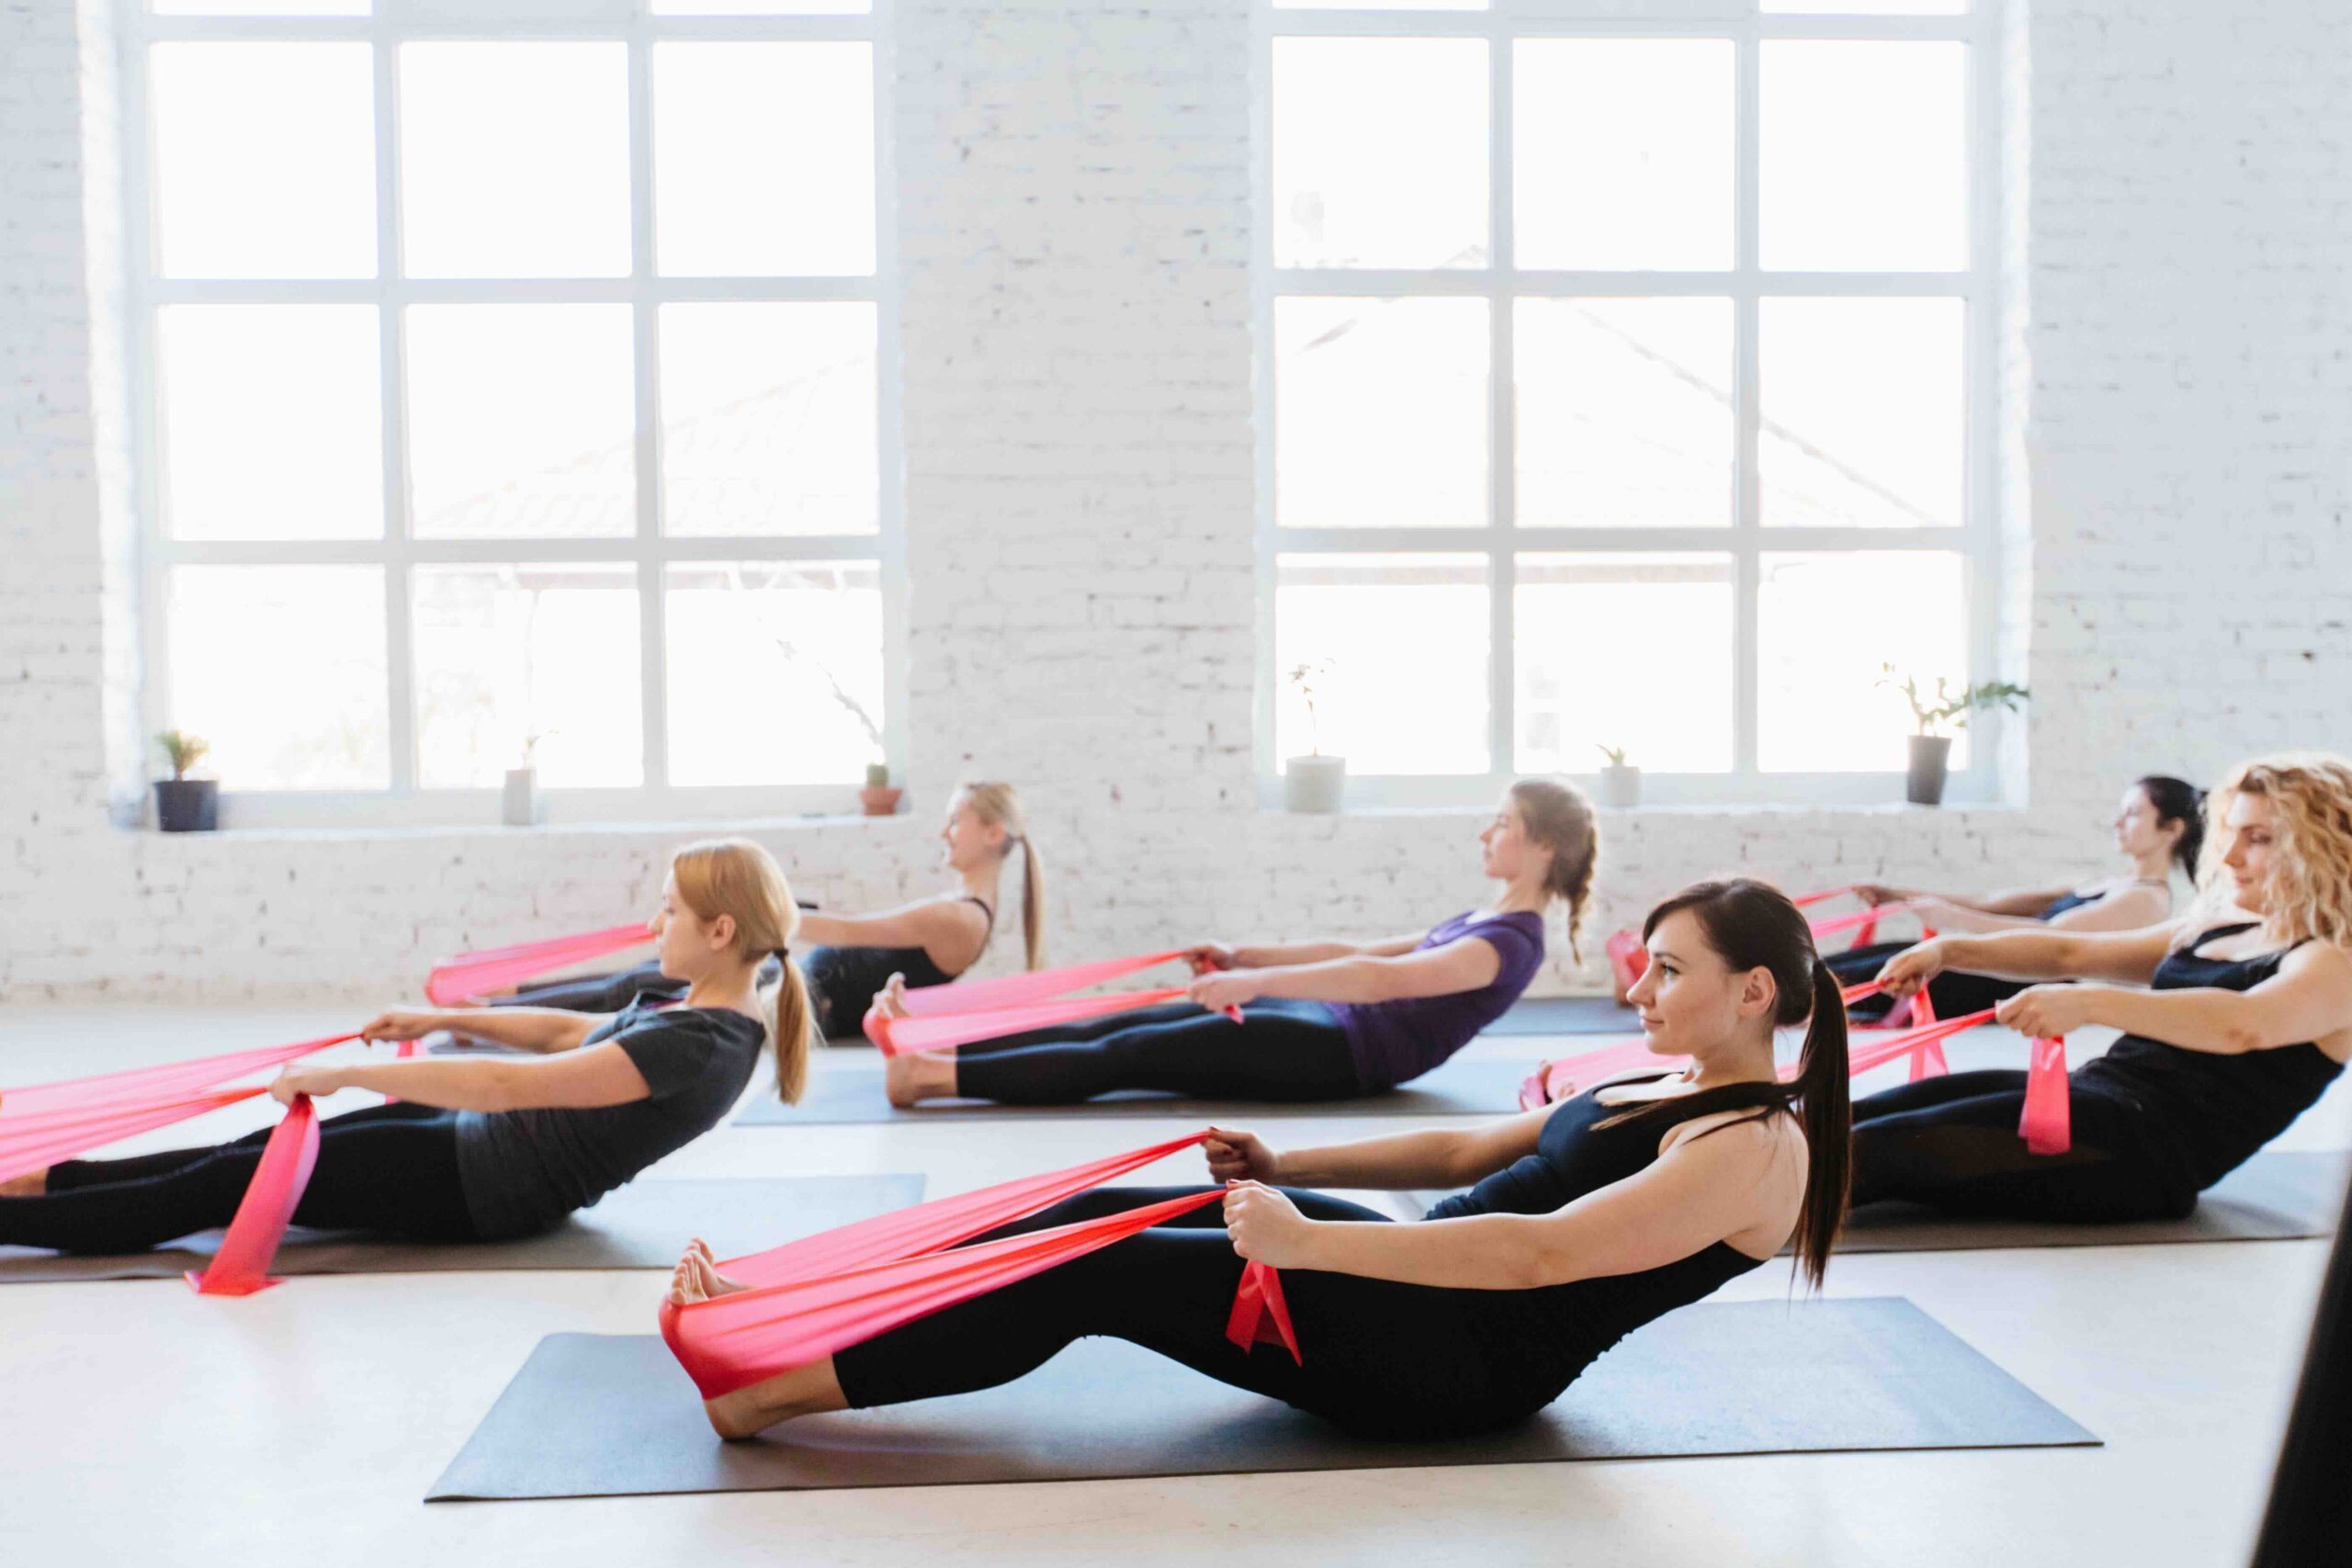 Precision & Control with the Fitness Circle, Prenatal Pilates on the Mat